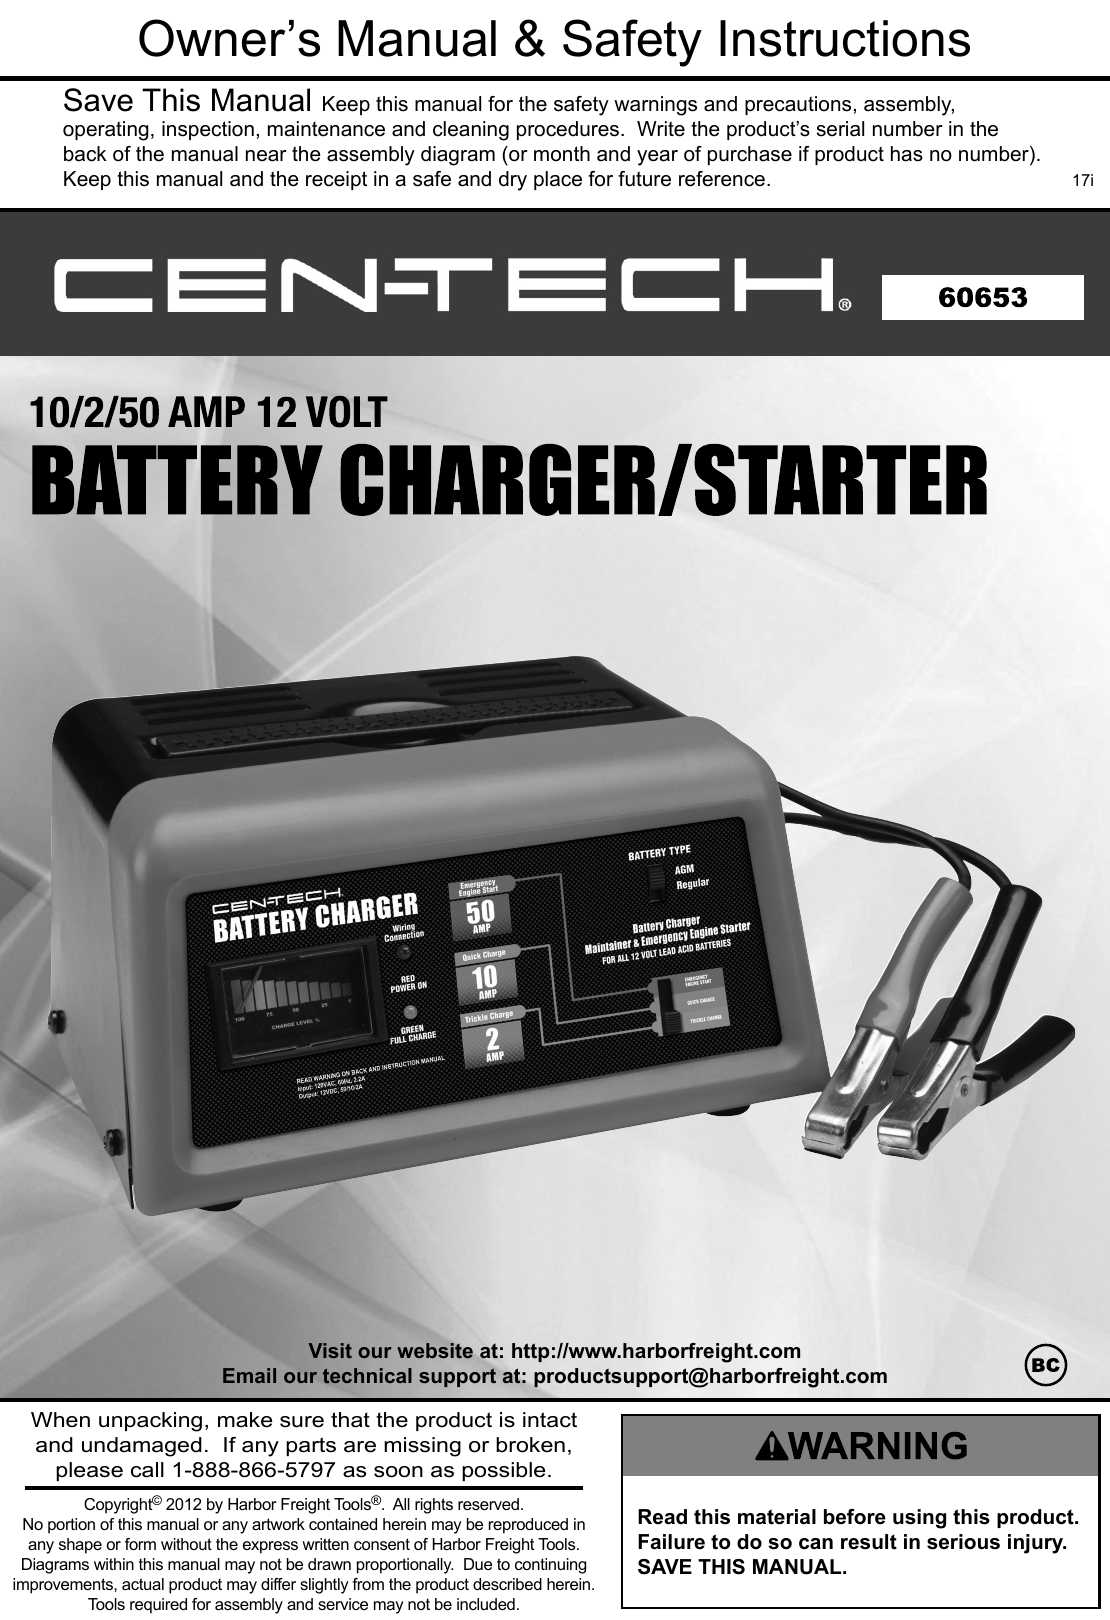 Manual For The 60653 Battery Charger And Engine Starter, 10/2/50 Amp, 12  Volt